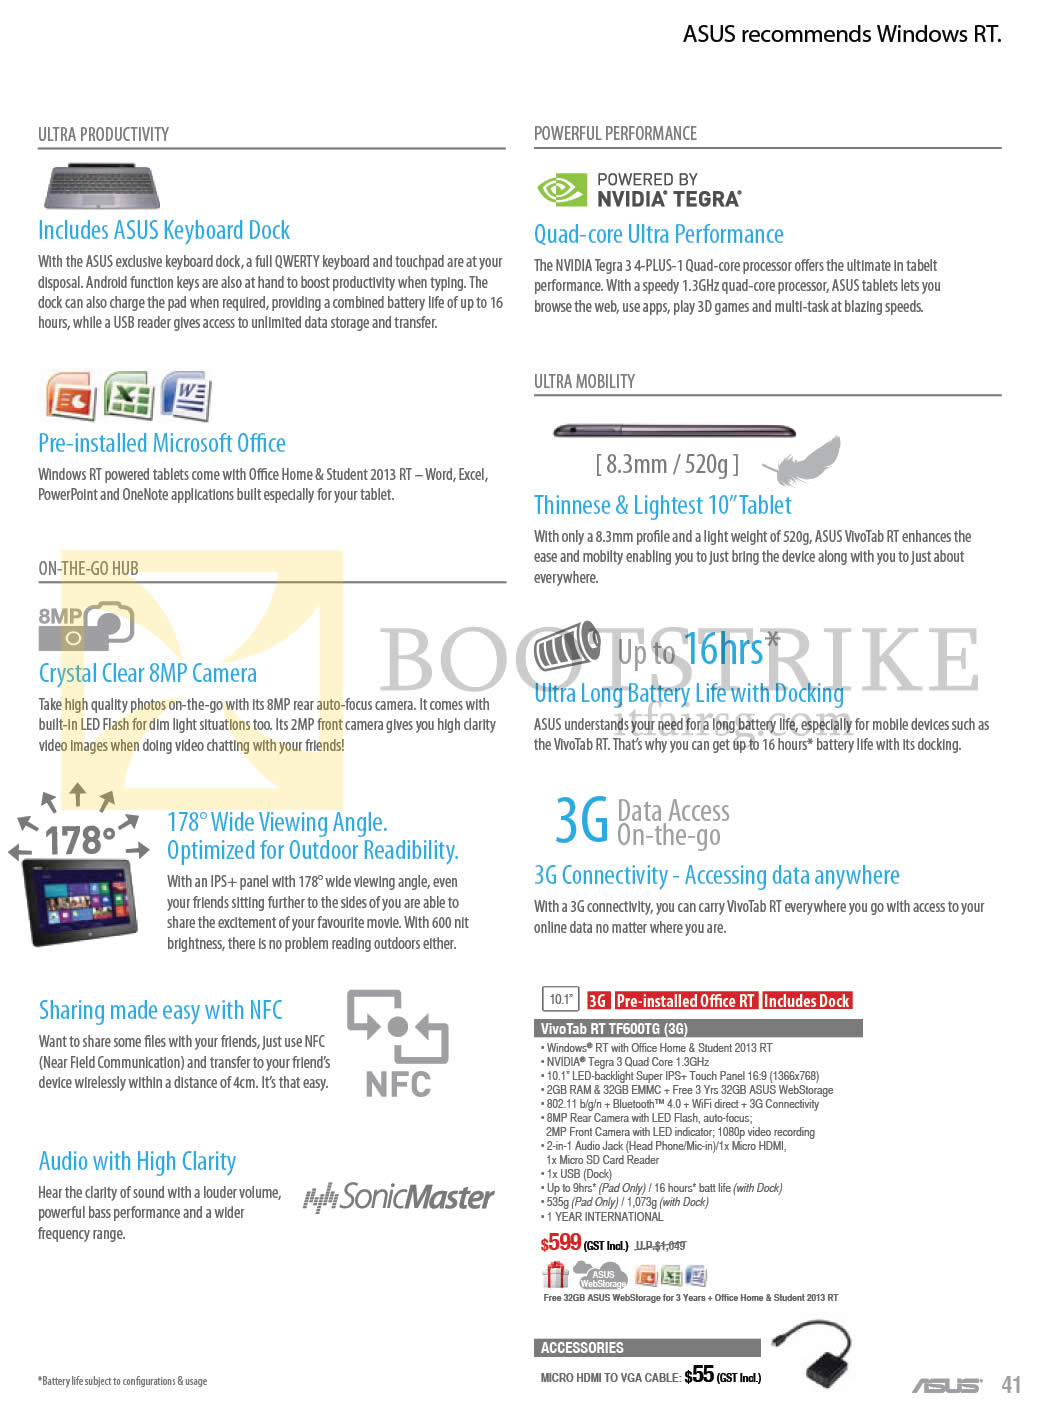 COMEX 2013 price list image brochure of ASUS Tablets VivoTab RT Features, TF600TG, Accessories